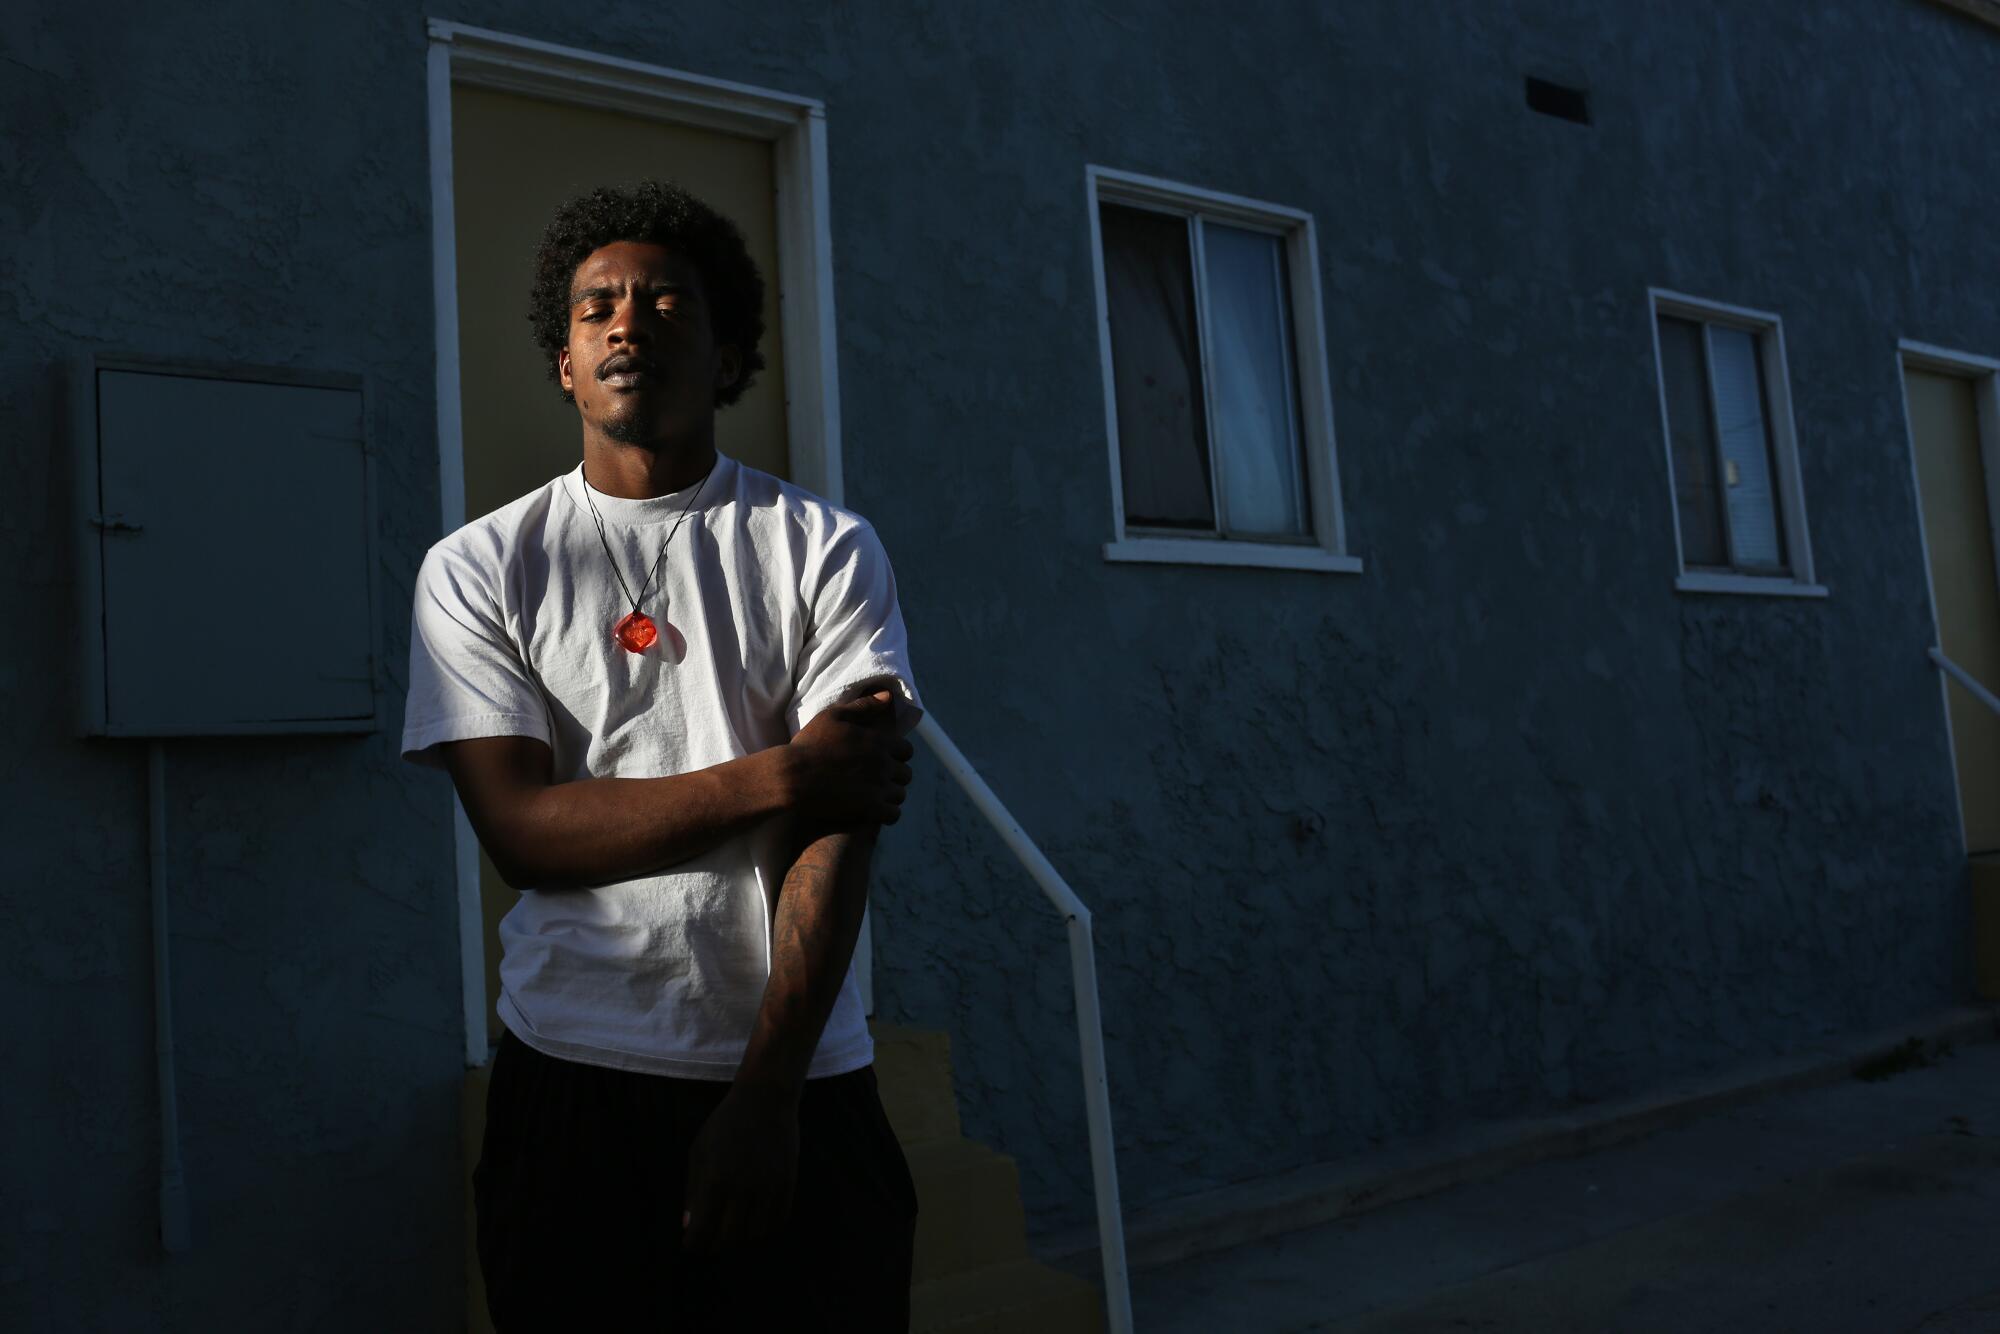 Ja'quest Jones, 19, stands for a portrait across the street from the apartment where he sometimes stays with his mom